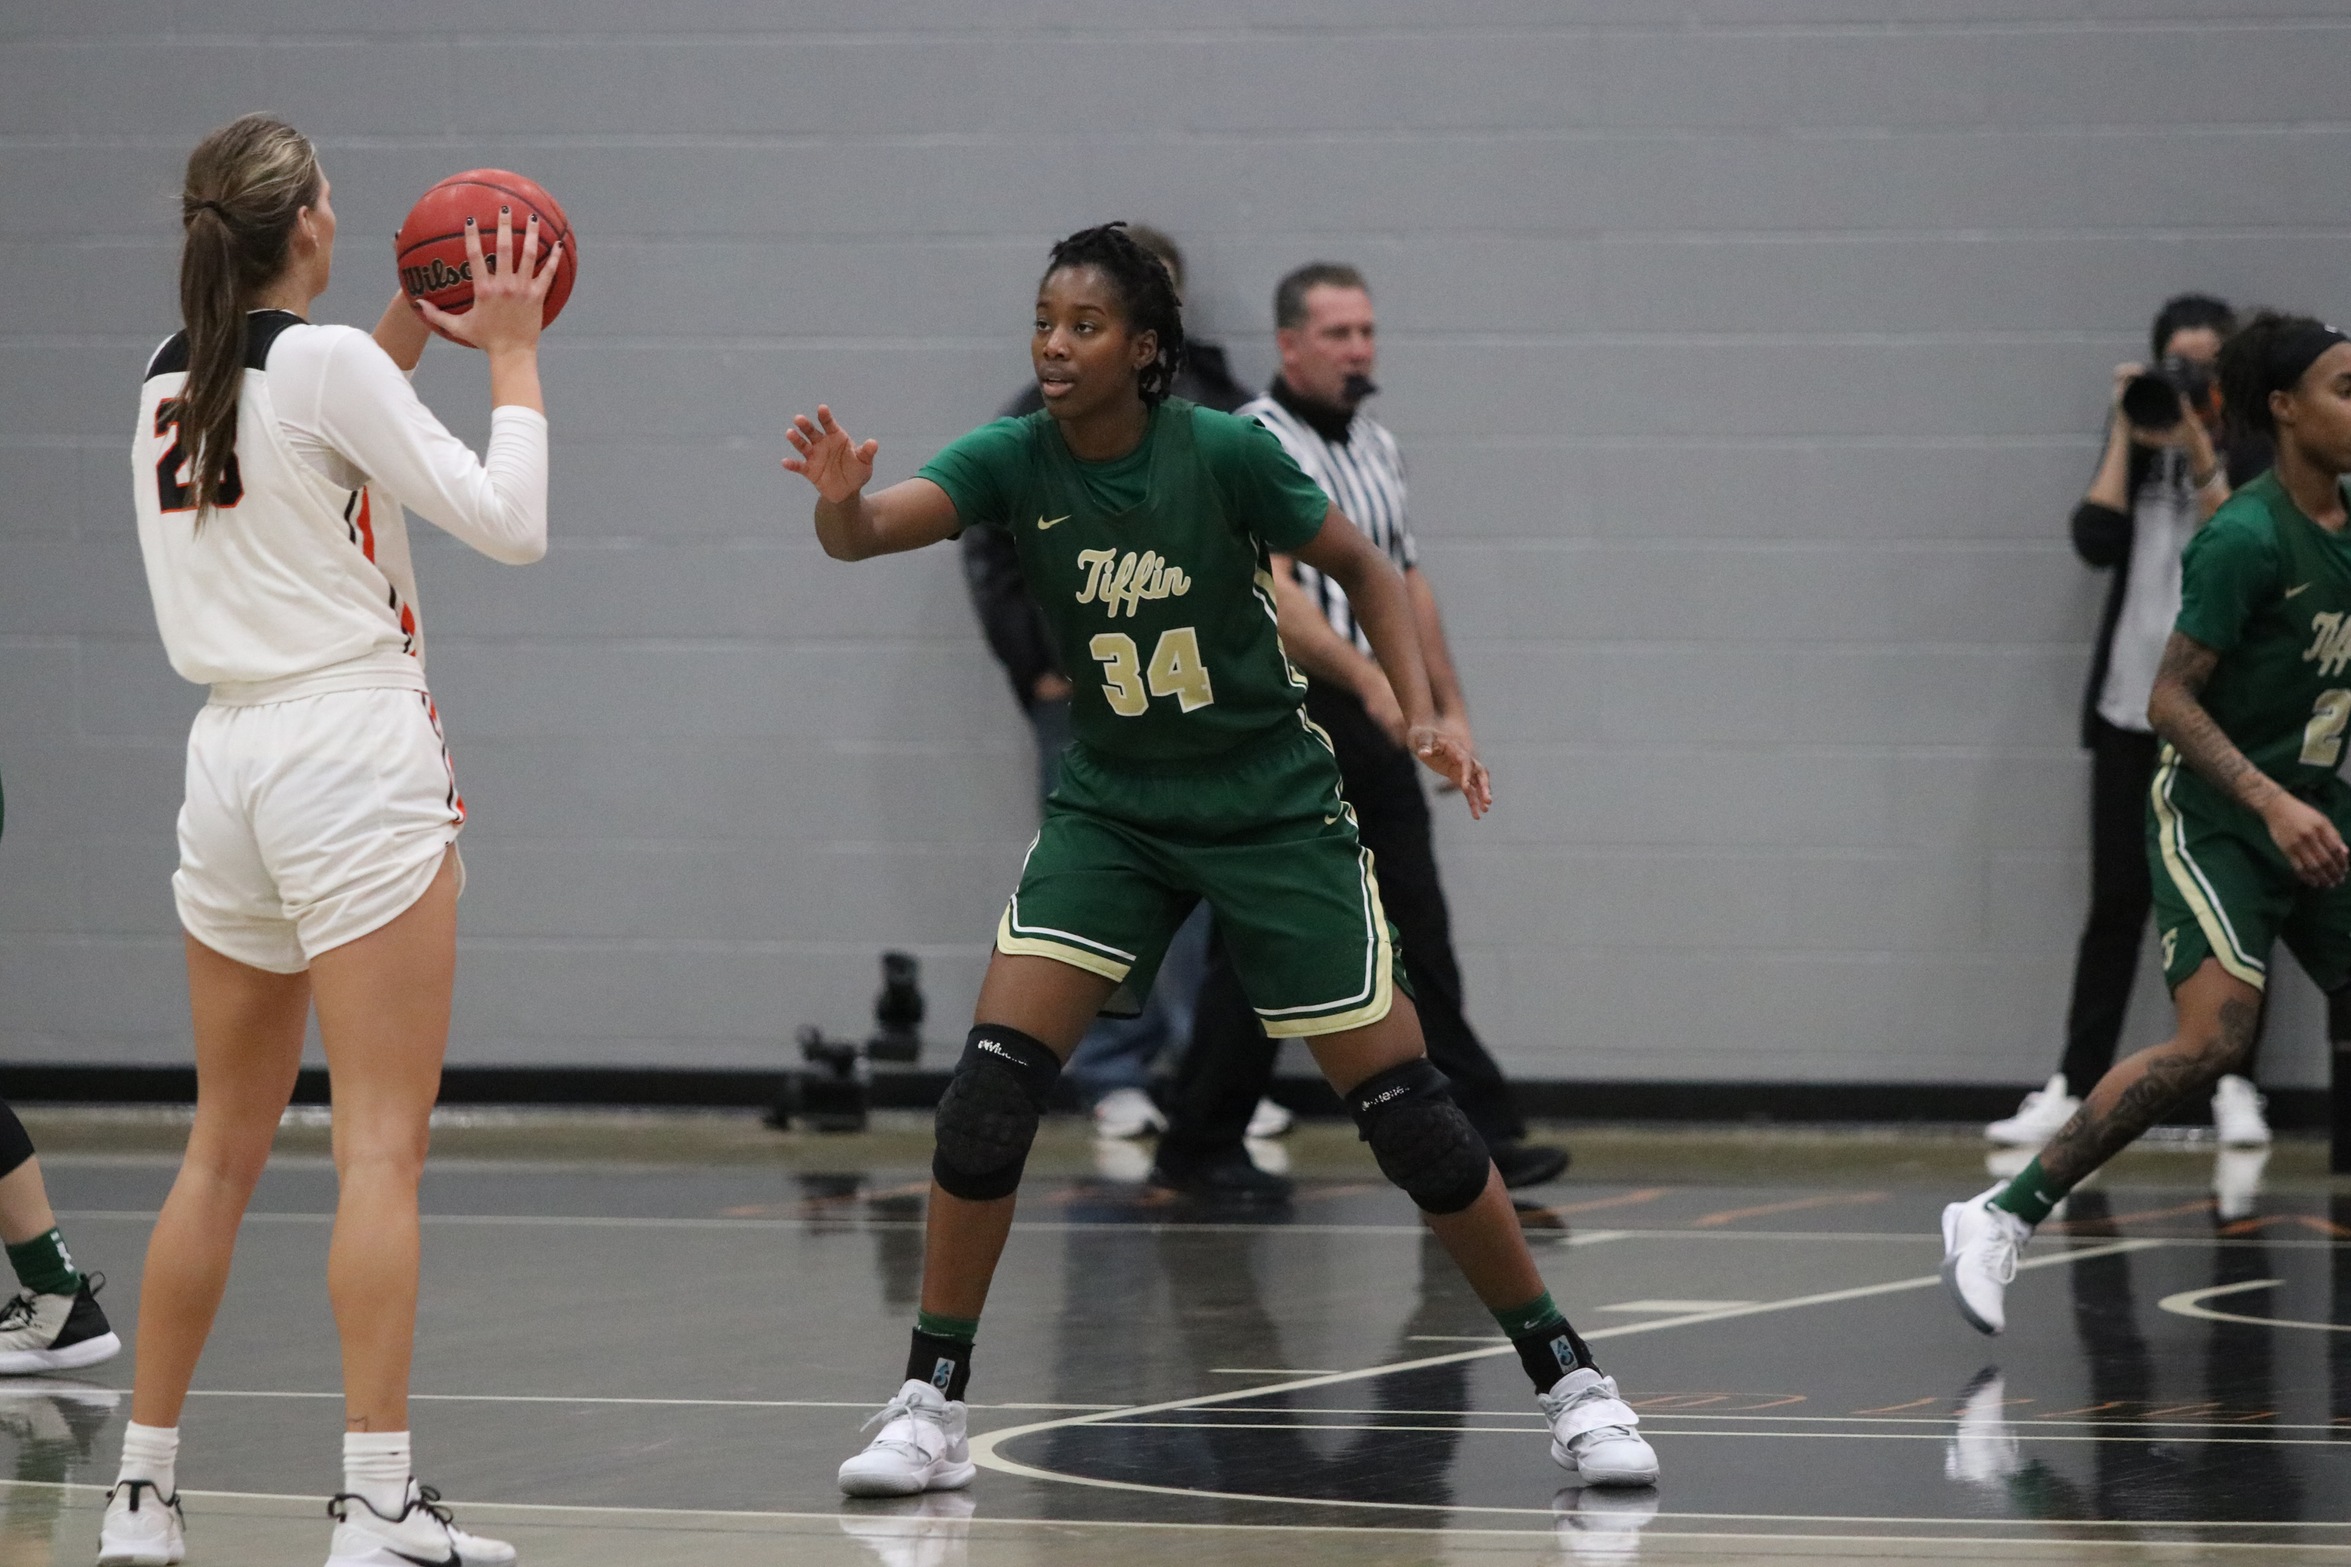 Tiffin University used second chance points to beat Lake Erie 67-56.